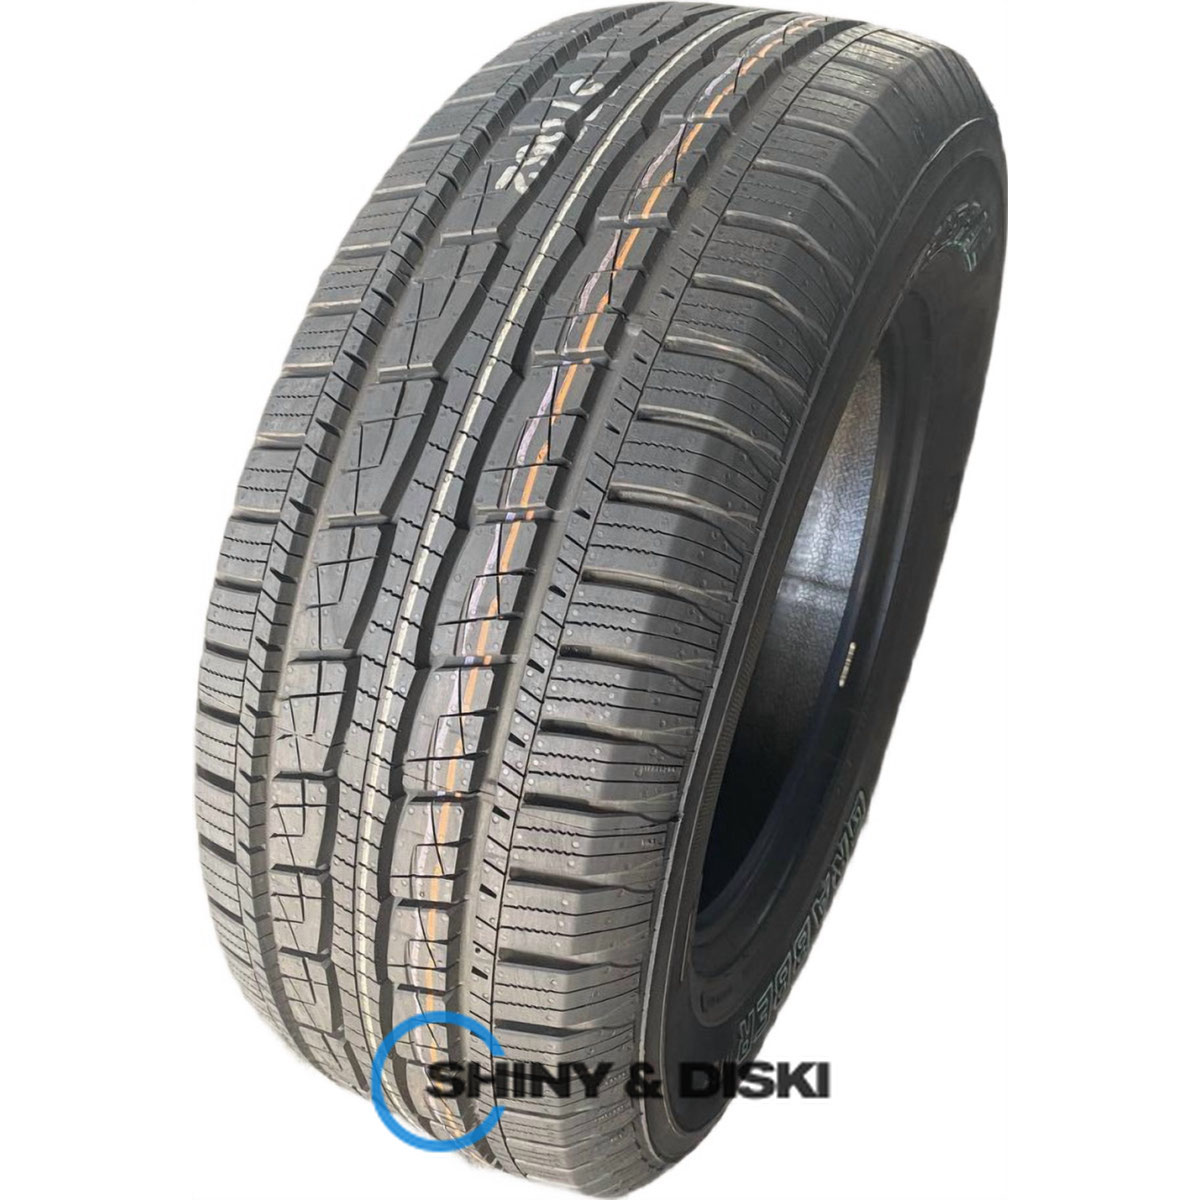 резина general tire grabber hts60 265/65 r18 114t owl